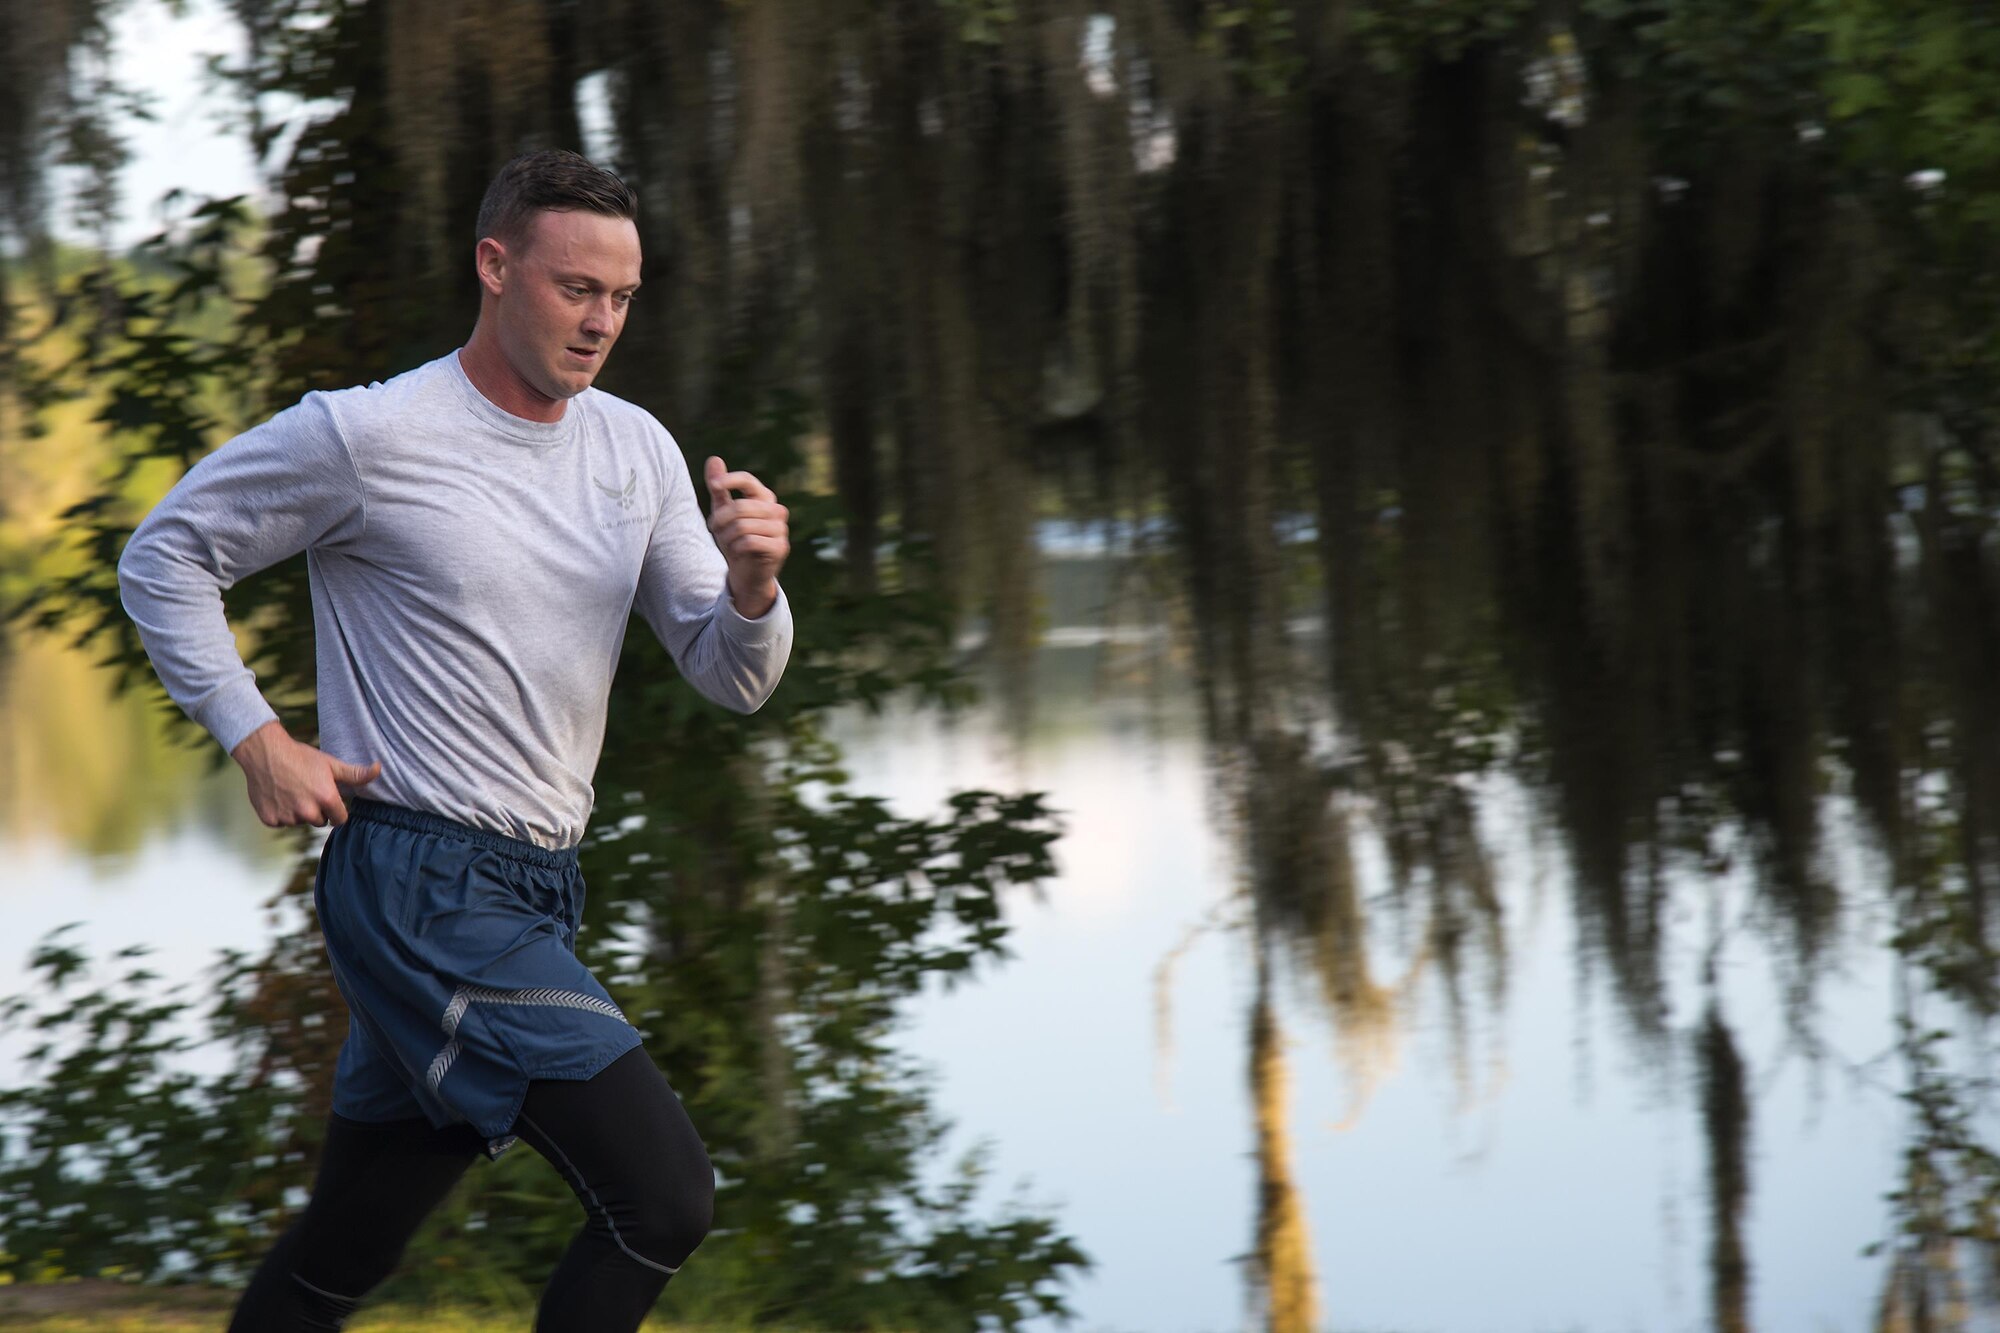 Senior Airman Geoffrey Hagle, 23d Civil Engineer Squadron emergency management journeyman, runs the final stretch of the National Preparedness Month 5k fun run, Sept. 1, 2017, at Moody Air Force Base, Ga. National Preparedness Month is designed to educate and empower not only the base, but also the community on preparing for any disaster. (U.S. Air Force photo by Airman 1st Class Erick Requadt)